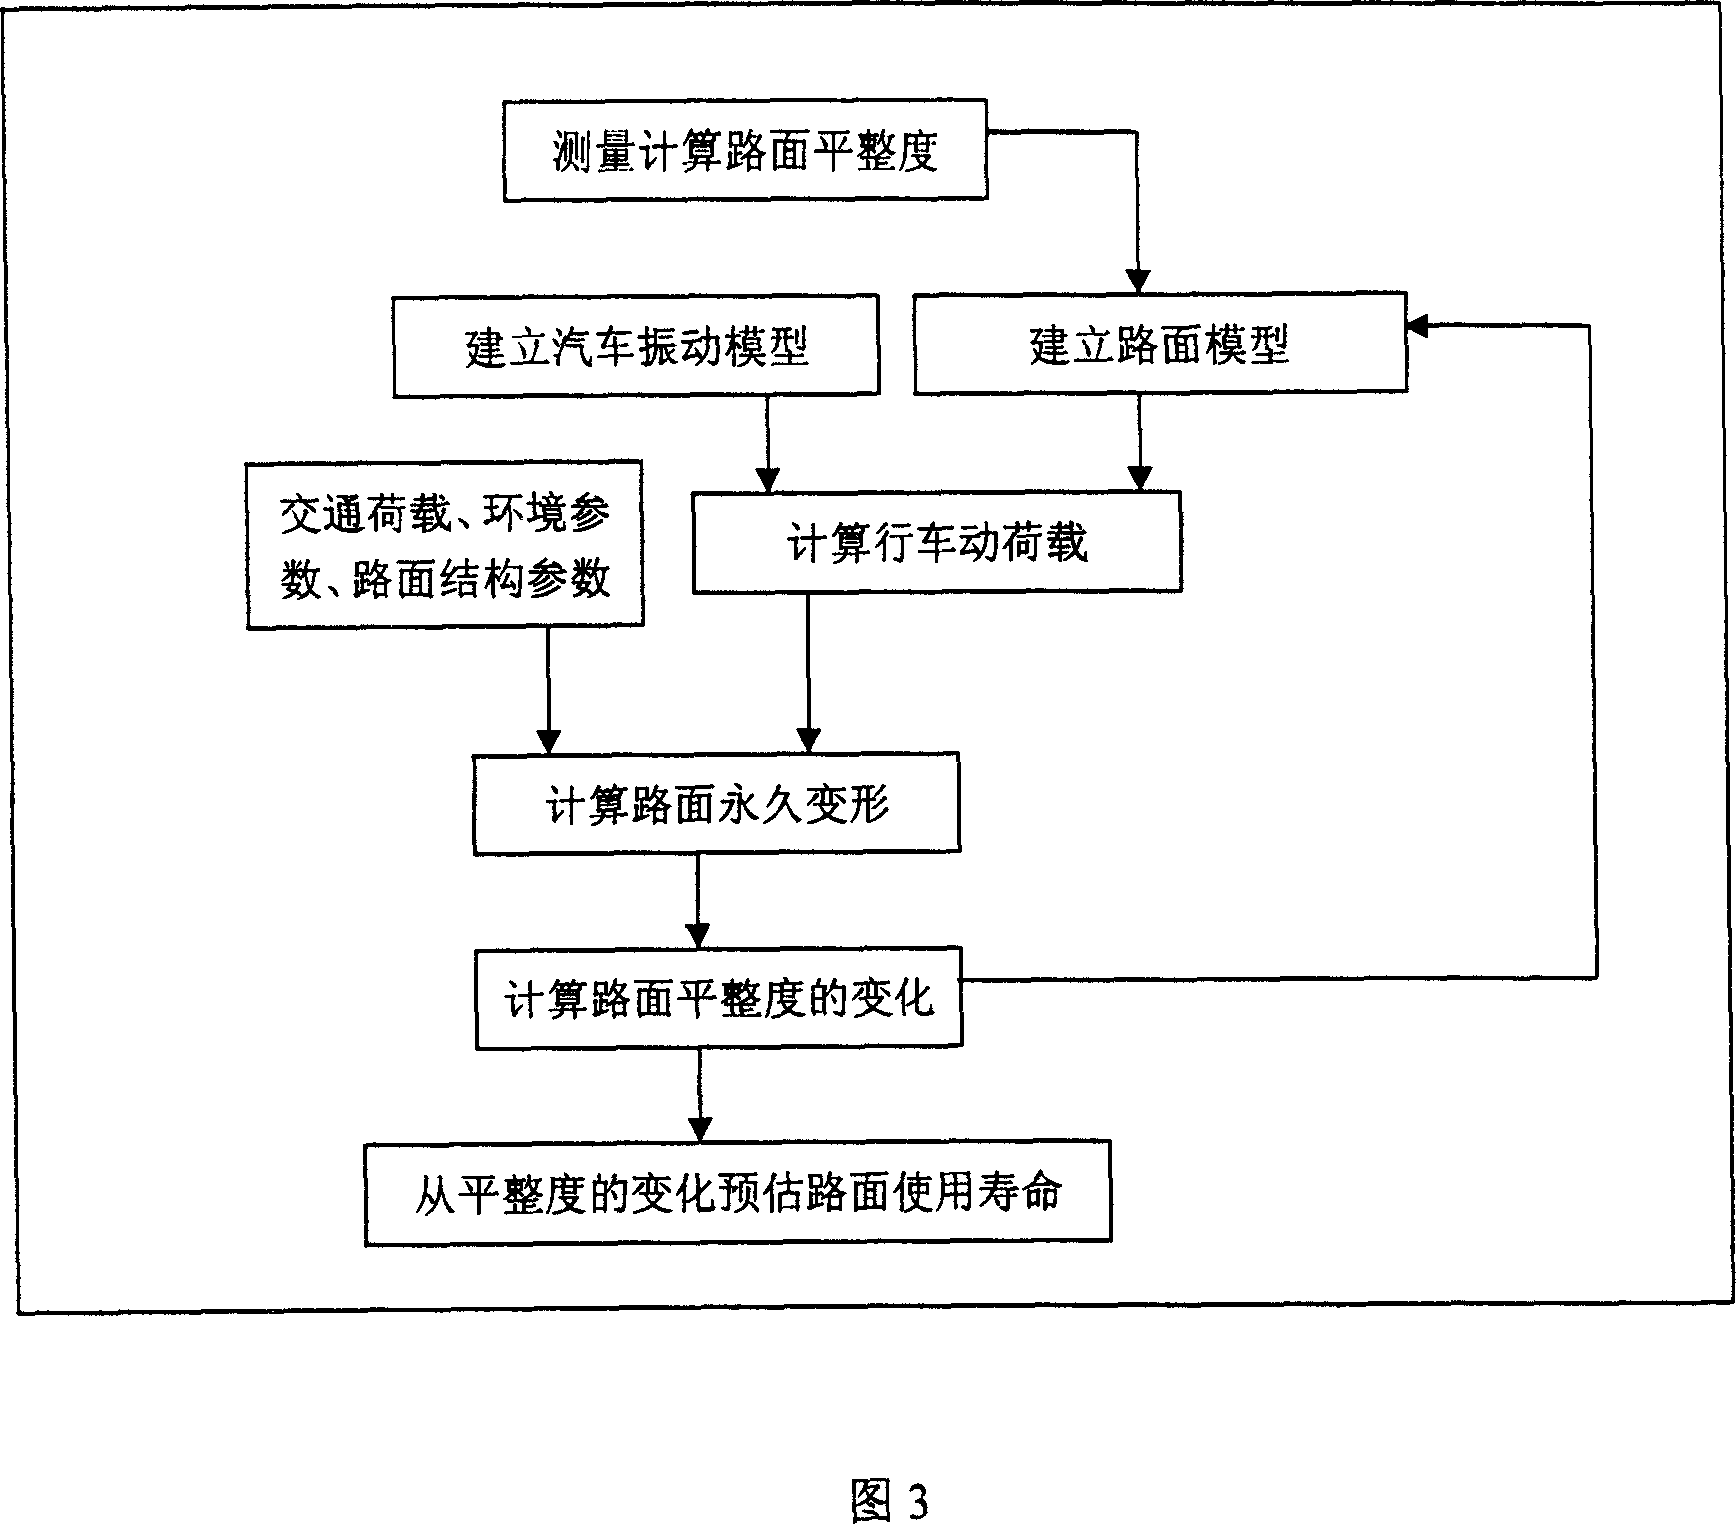 Method for predicting asphalt road service life auording to road surface planeness